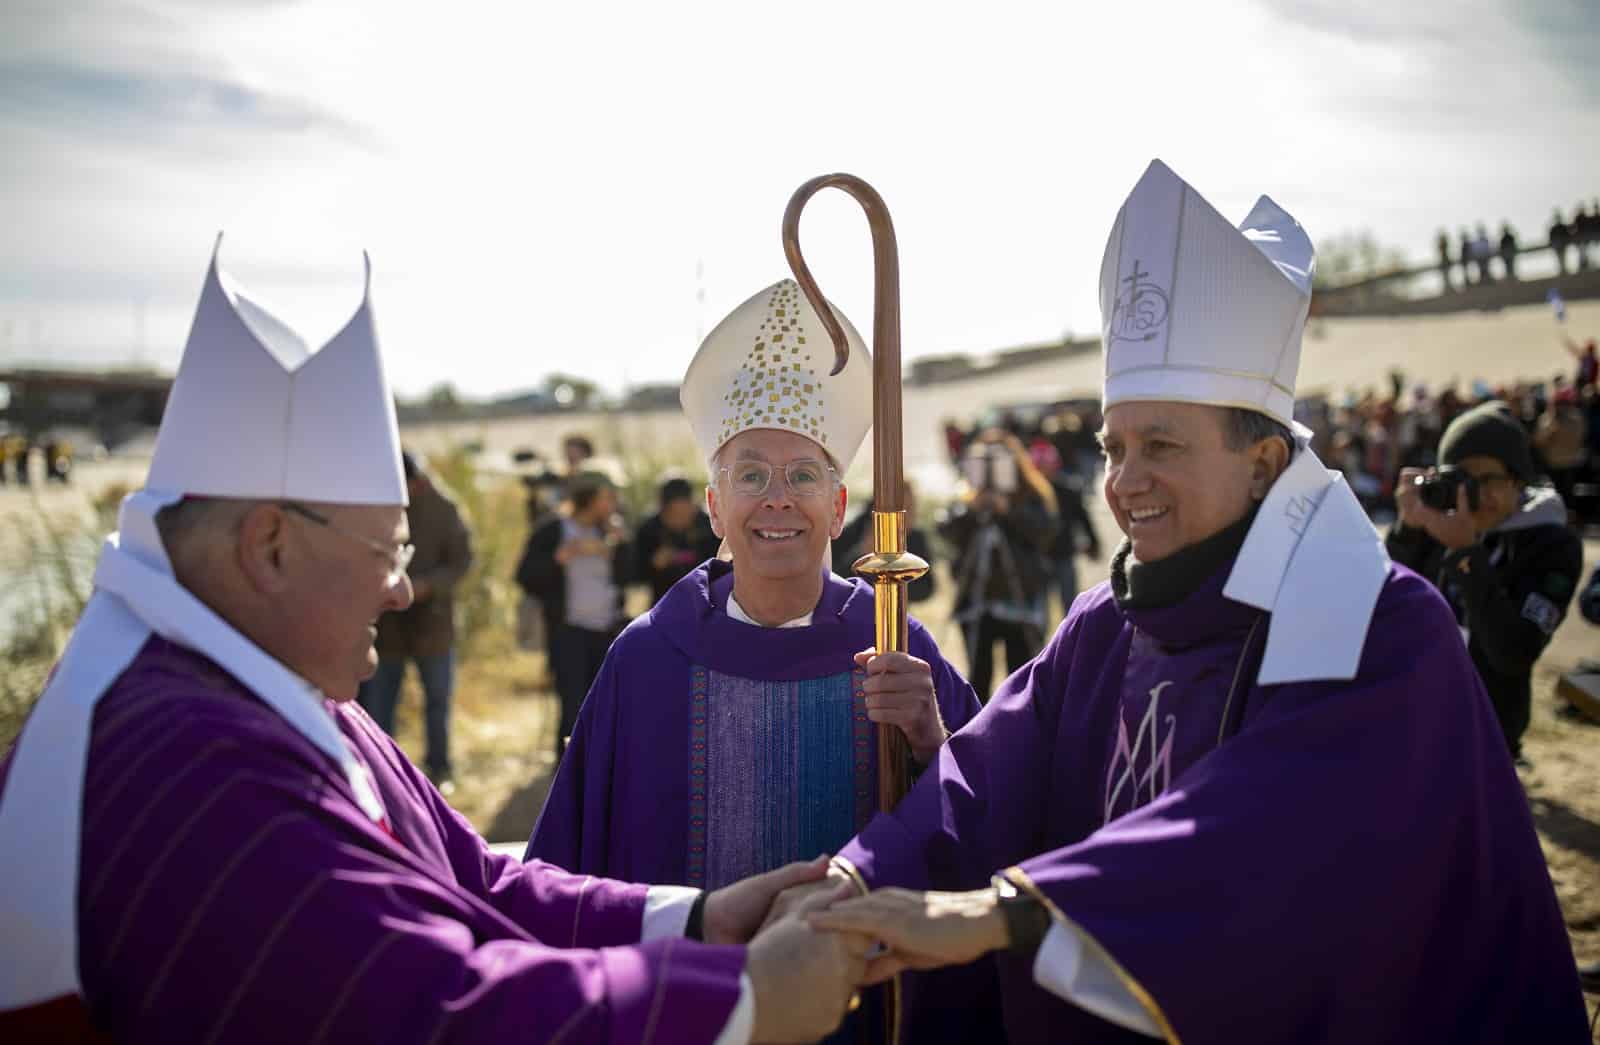 What Can the Bishops Take From the Border Mass?